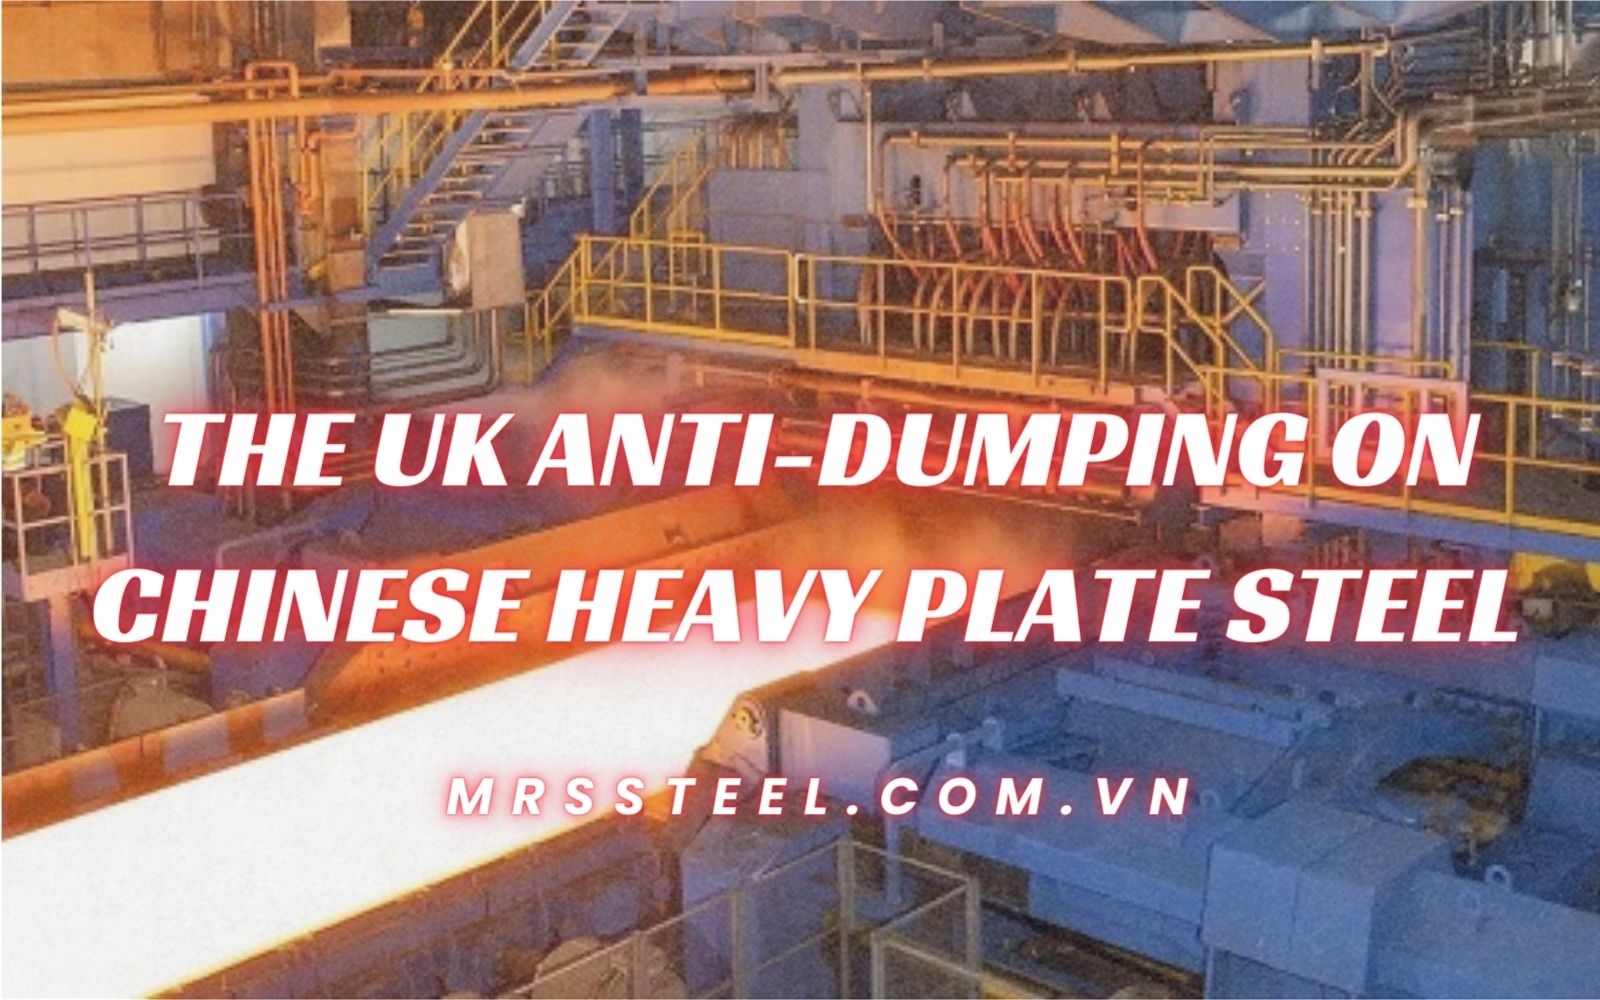 The UK government has agreed with the TRA's recommendation on heavy plate steel imports from China